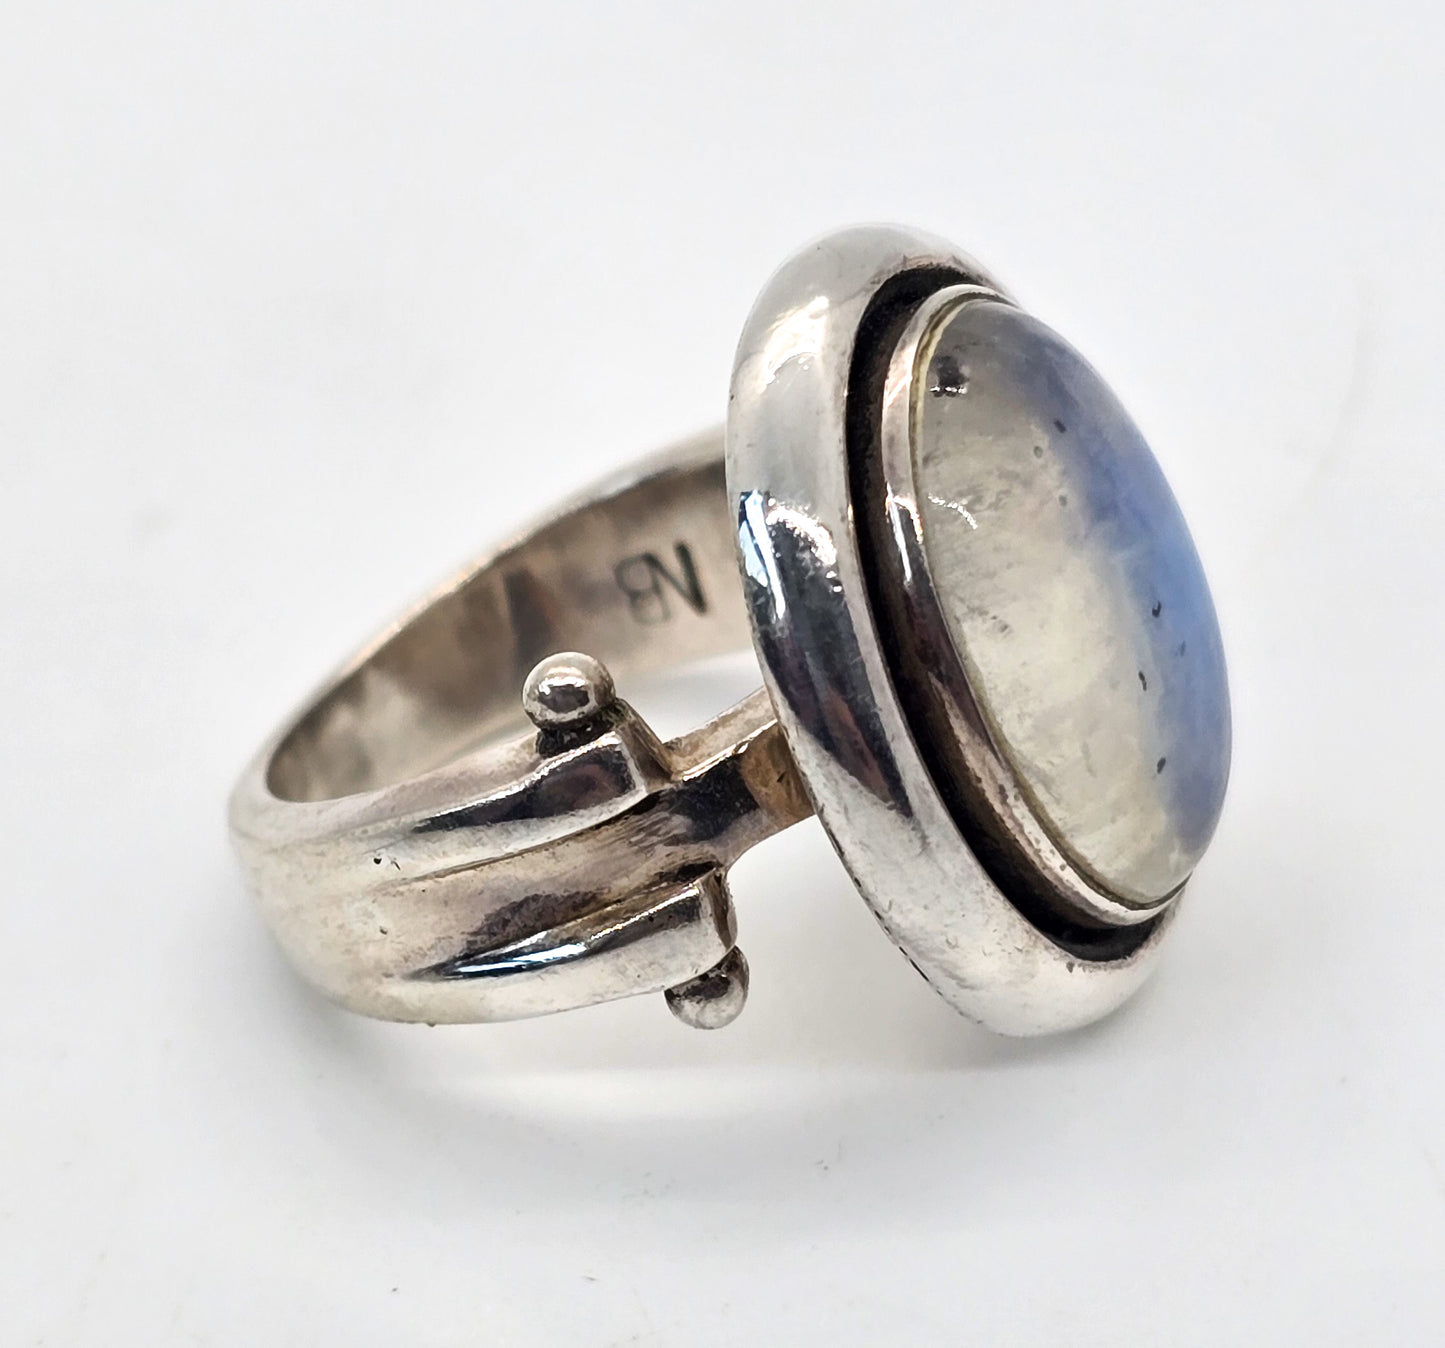 Nicky Butler NB Moonstone large flashy vintage sterling silver ring size 7